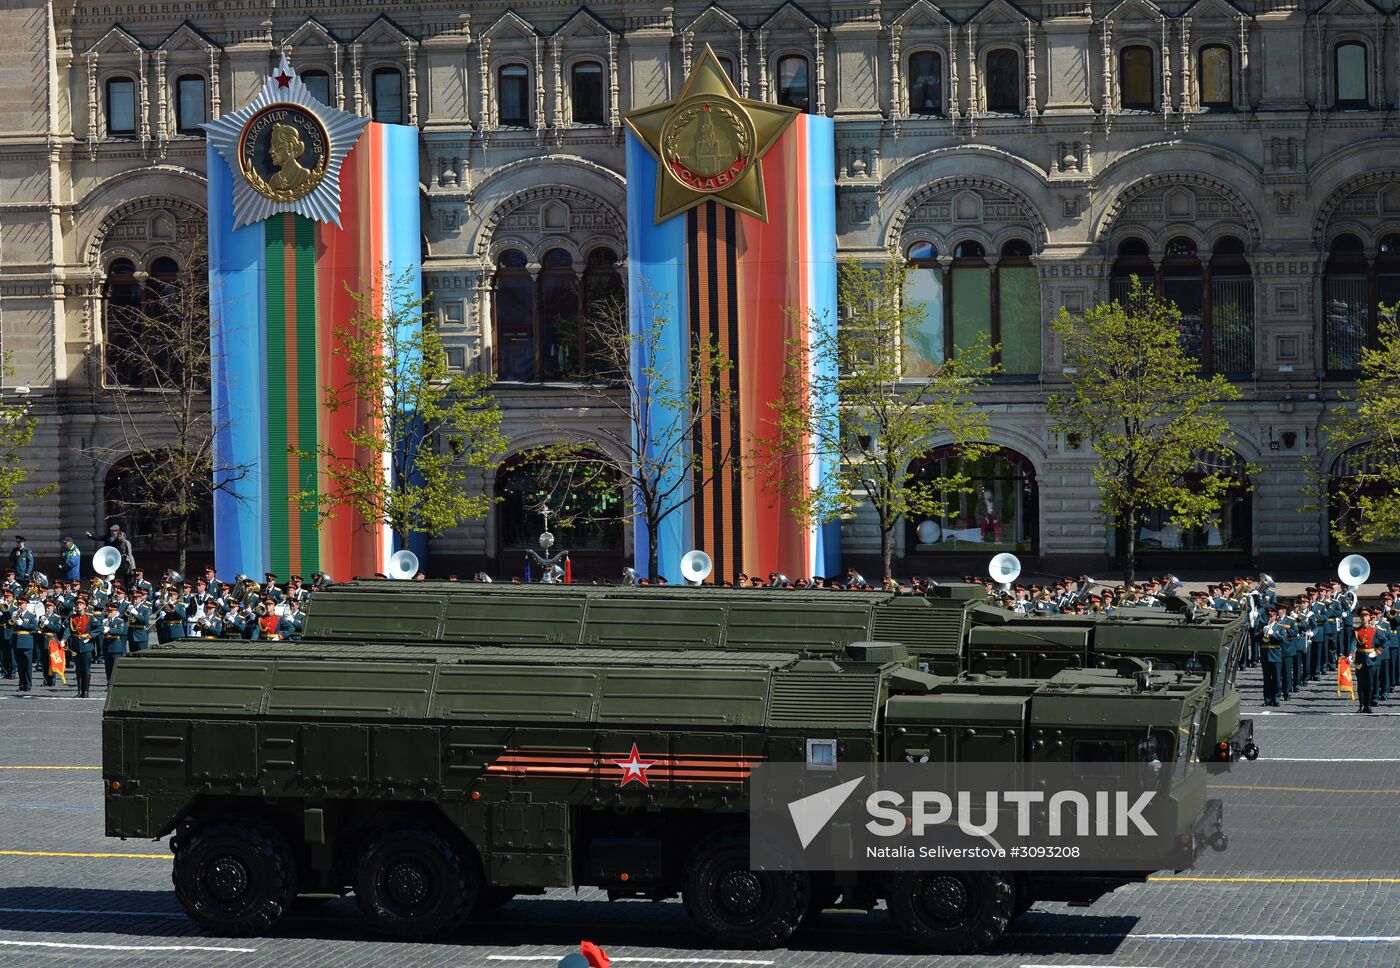 Final rehearsal of military parade marking 72nd anniversary of victory in the Great Patriotic War